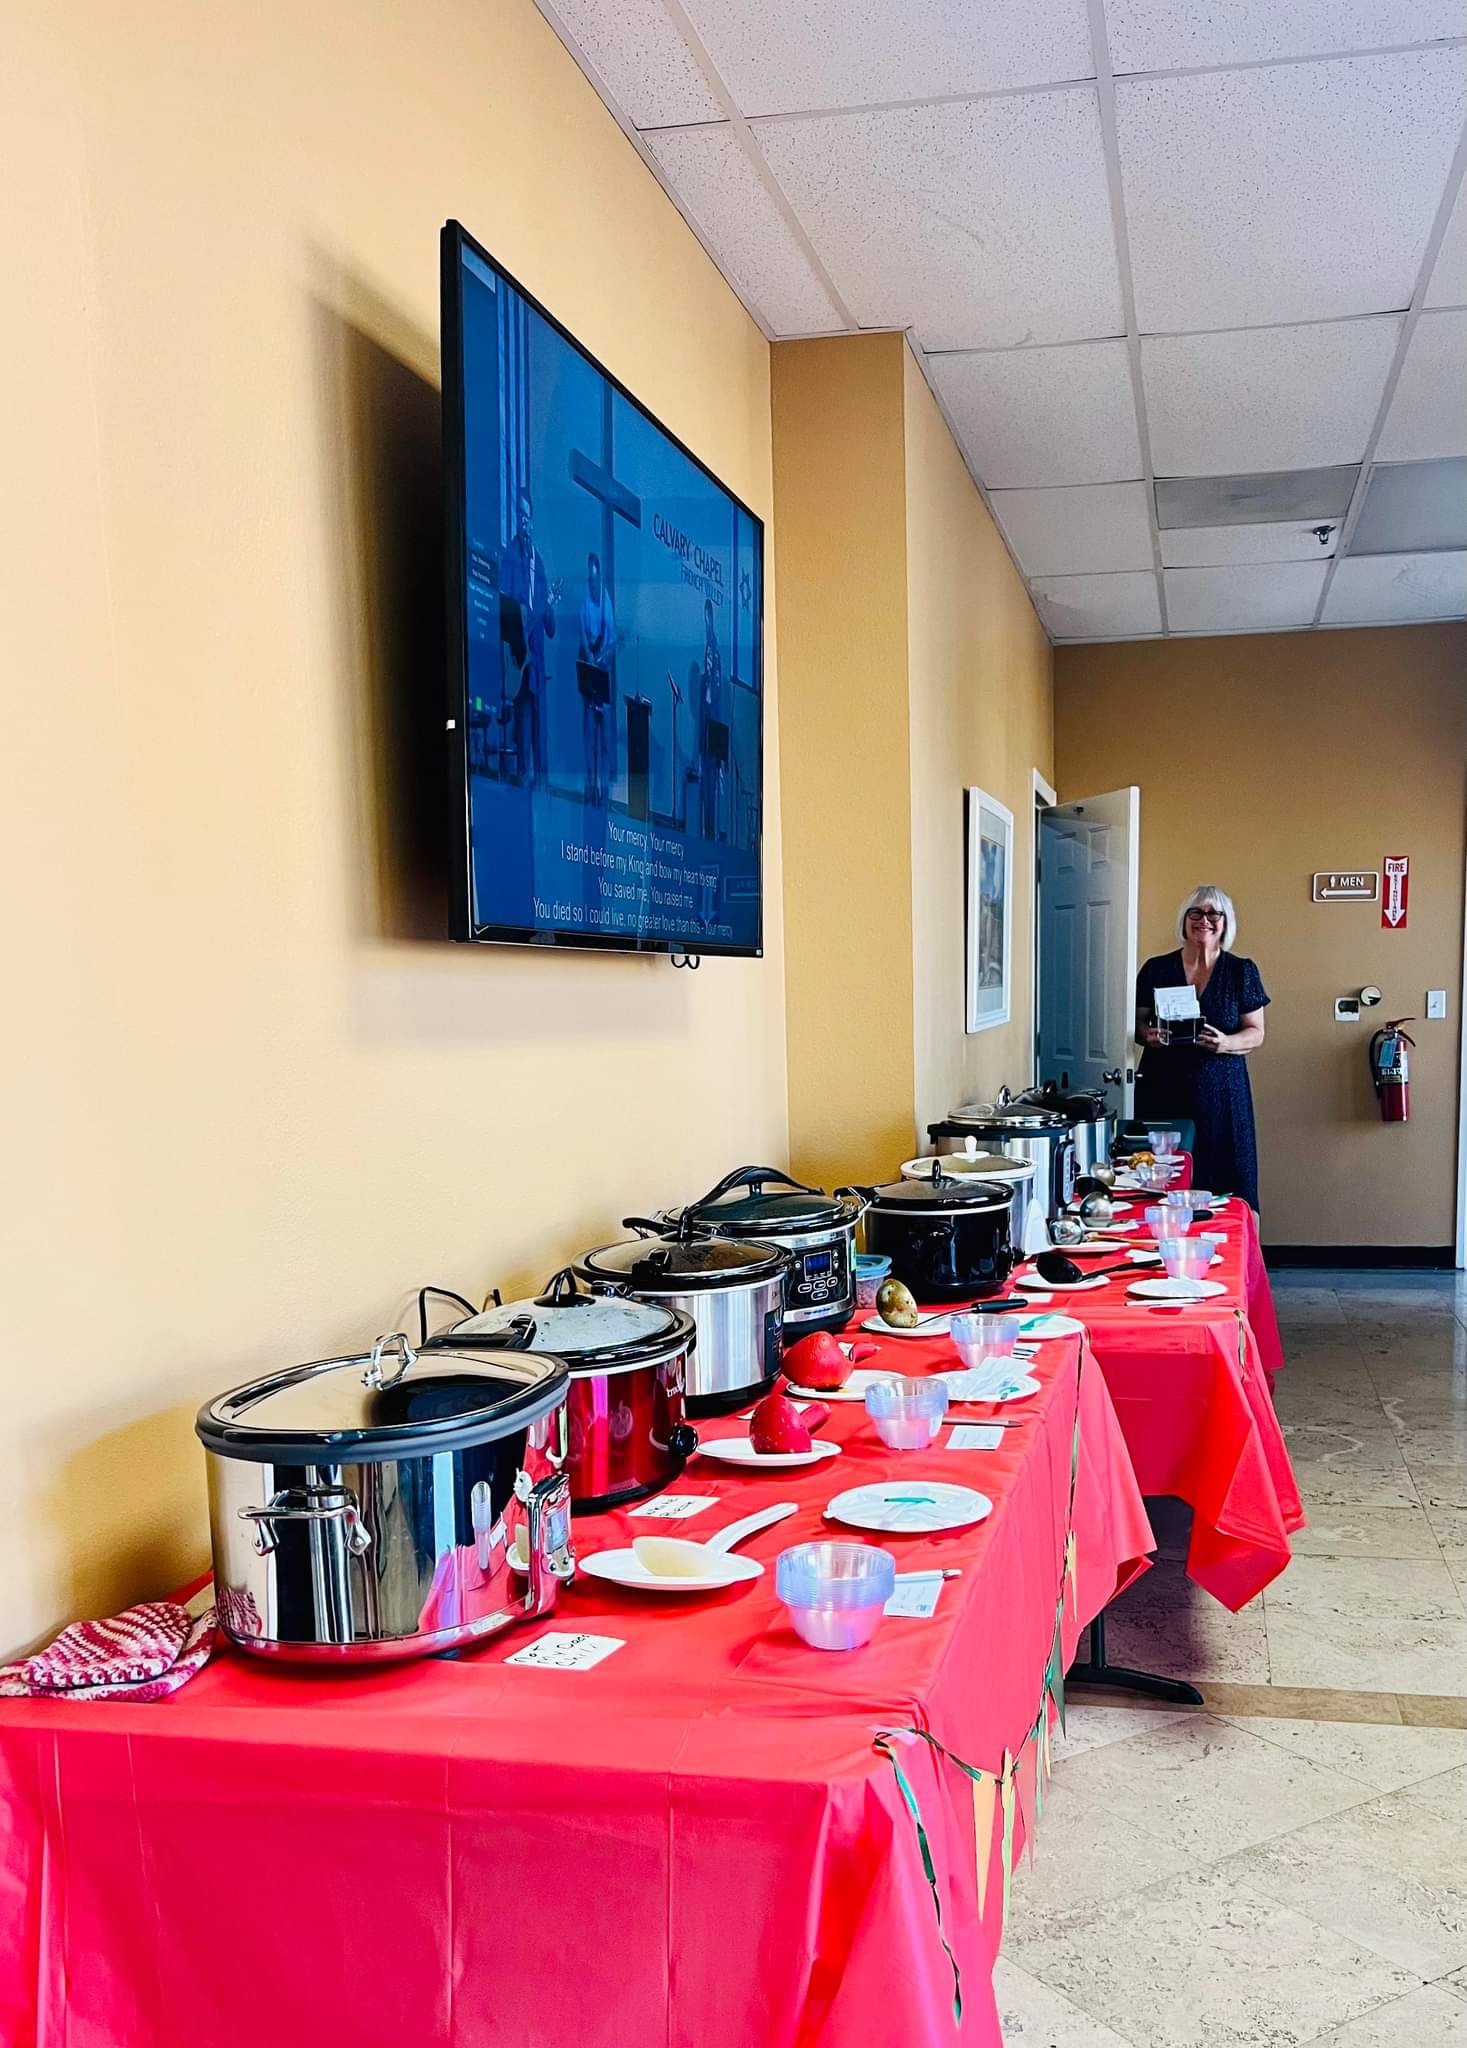 Chili Cook-off at CCFV